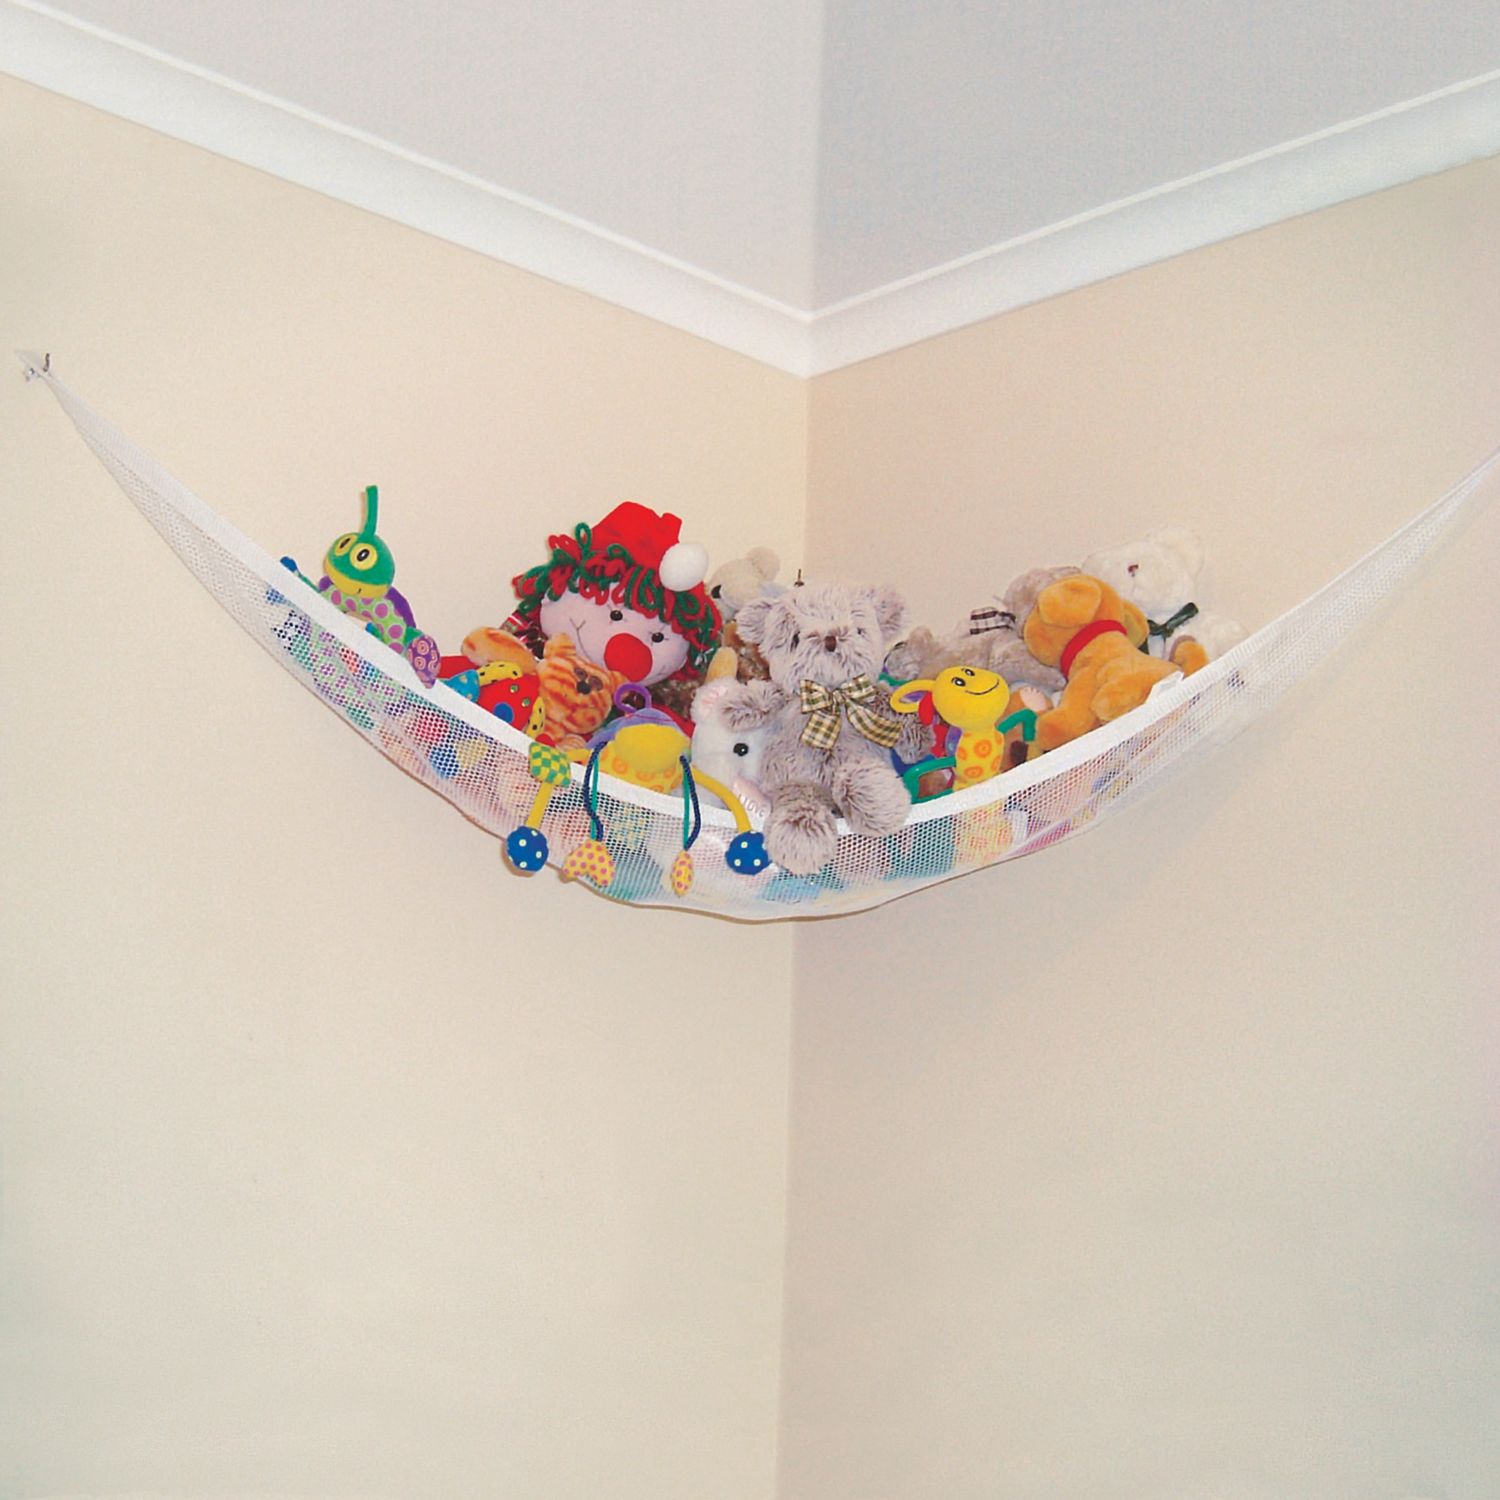 Image for Dreambaby Toy Storage Hammock & Chain at Kohl's.